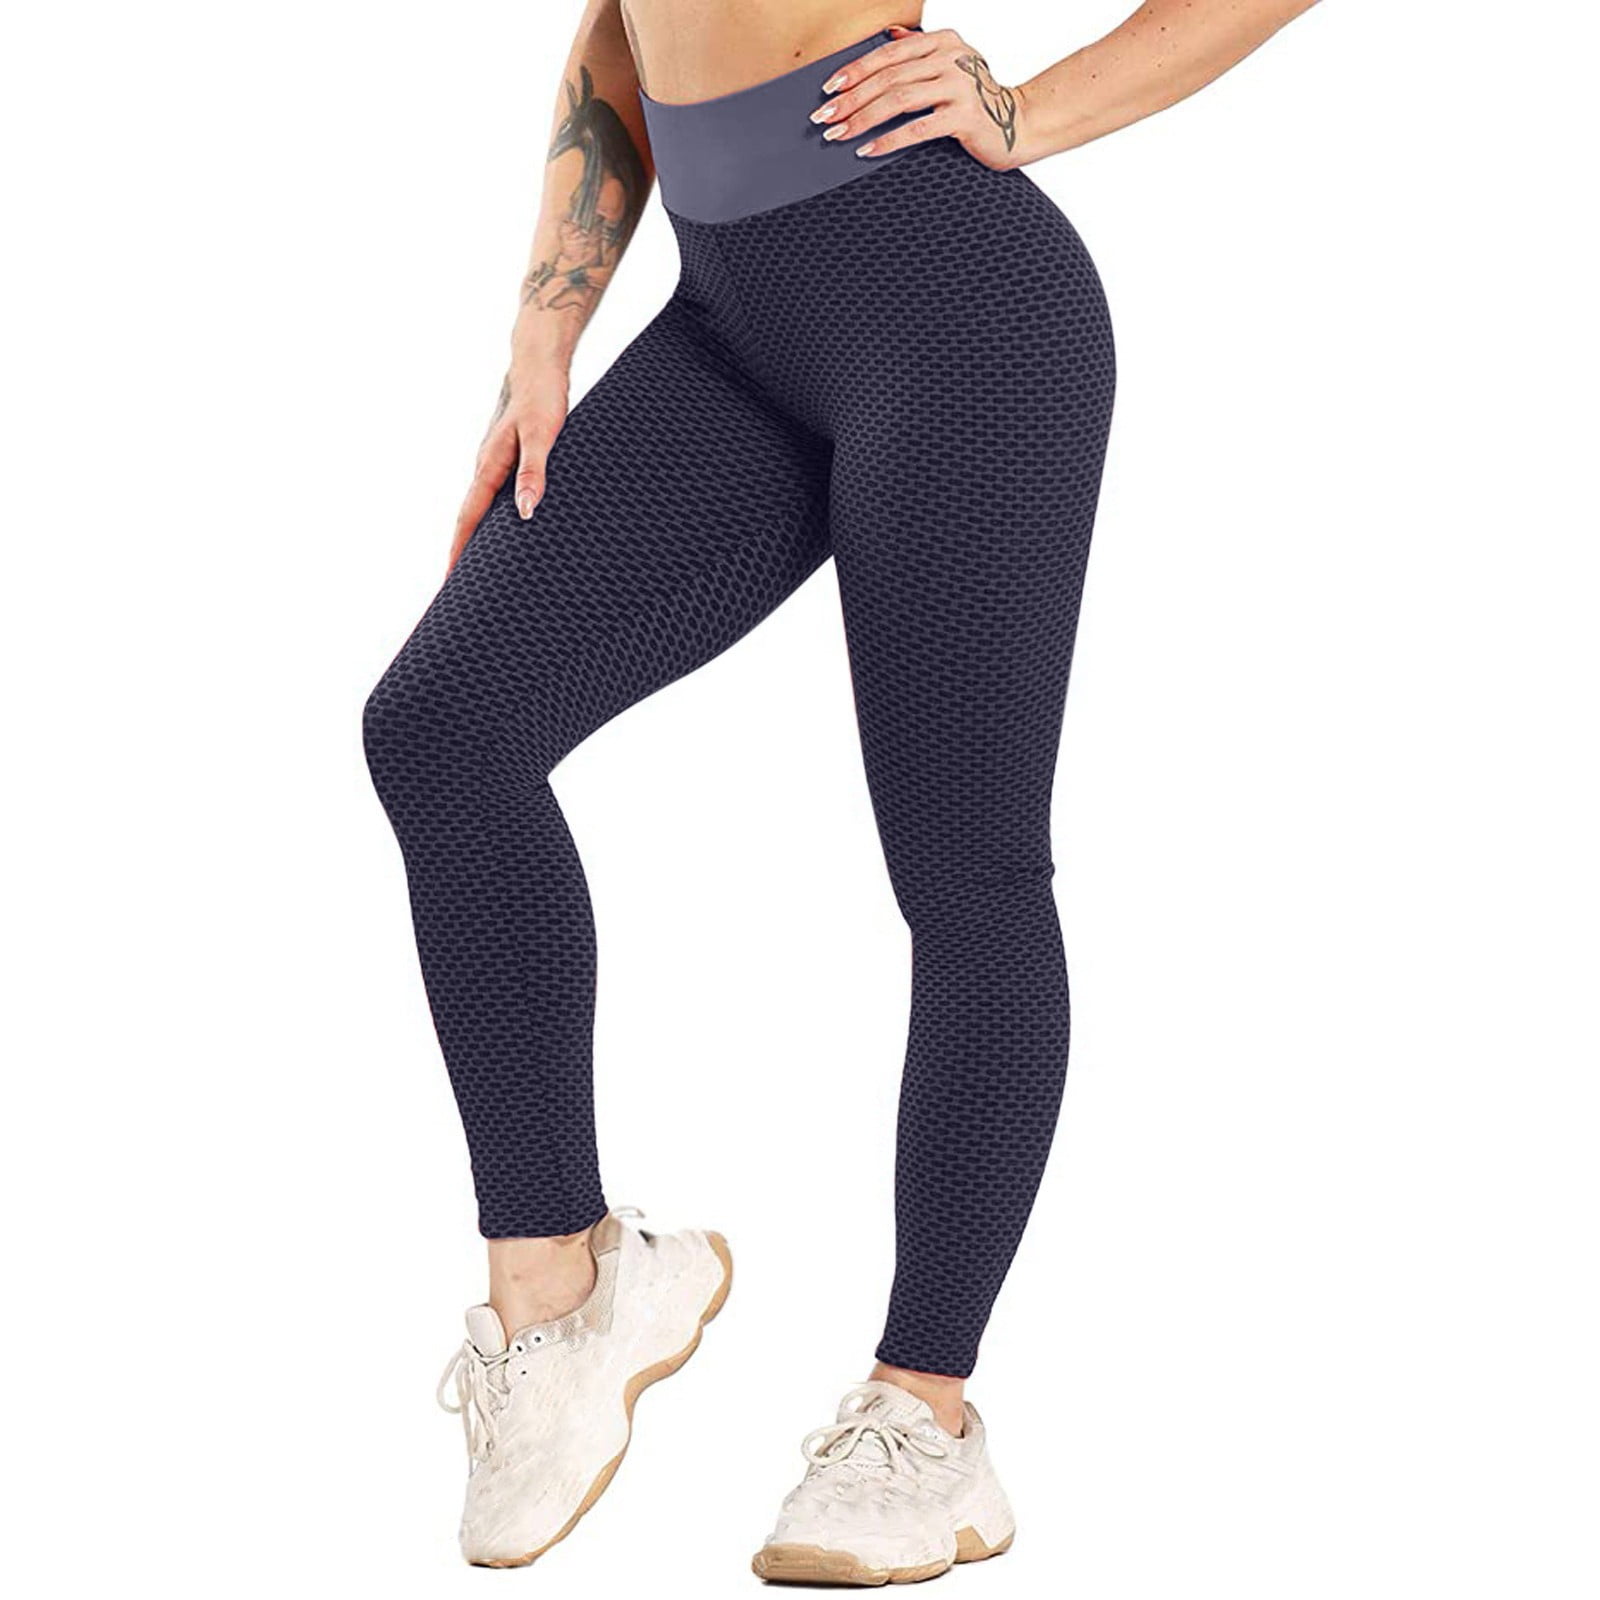 Buy YAMOM High Waist Butt Lifting Anti Cellulite Workout Leggings for Women  Yoga Pants Tummy Control Leggings Tight, Z - Blue, XX-Large at Amazon.in